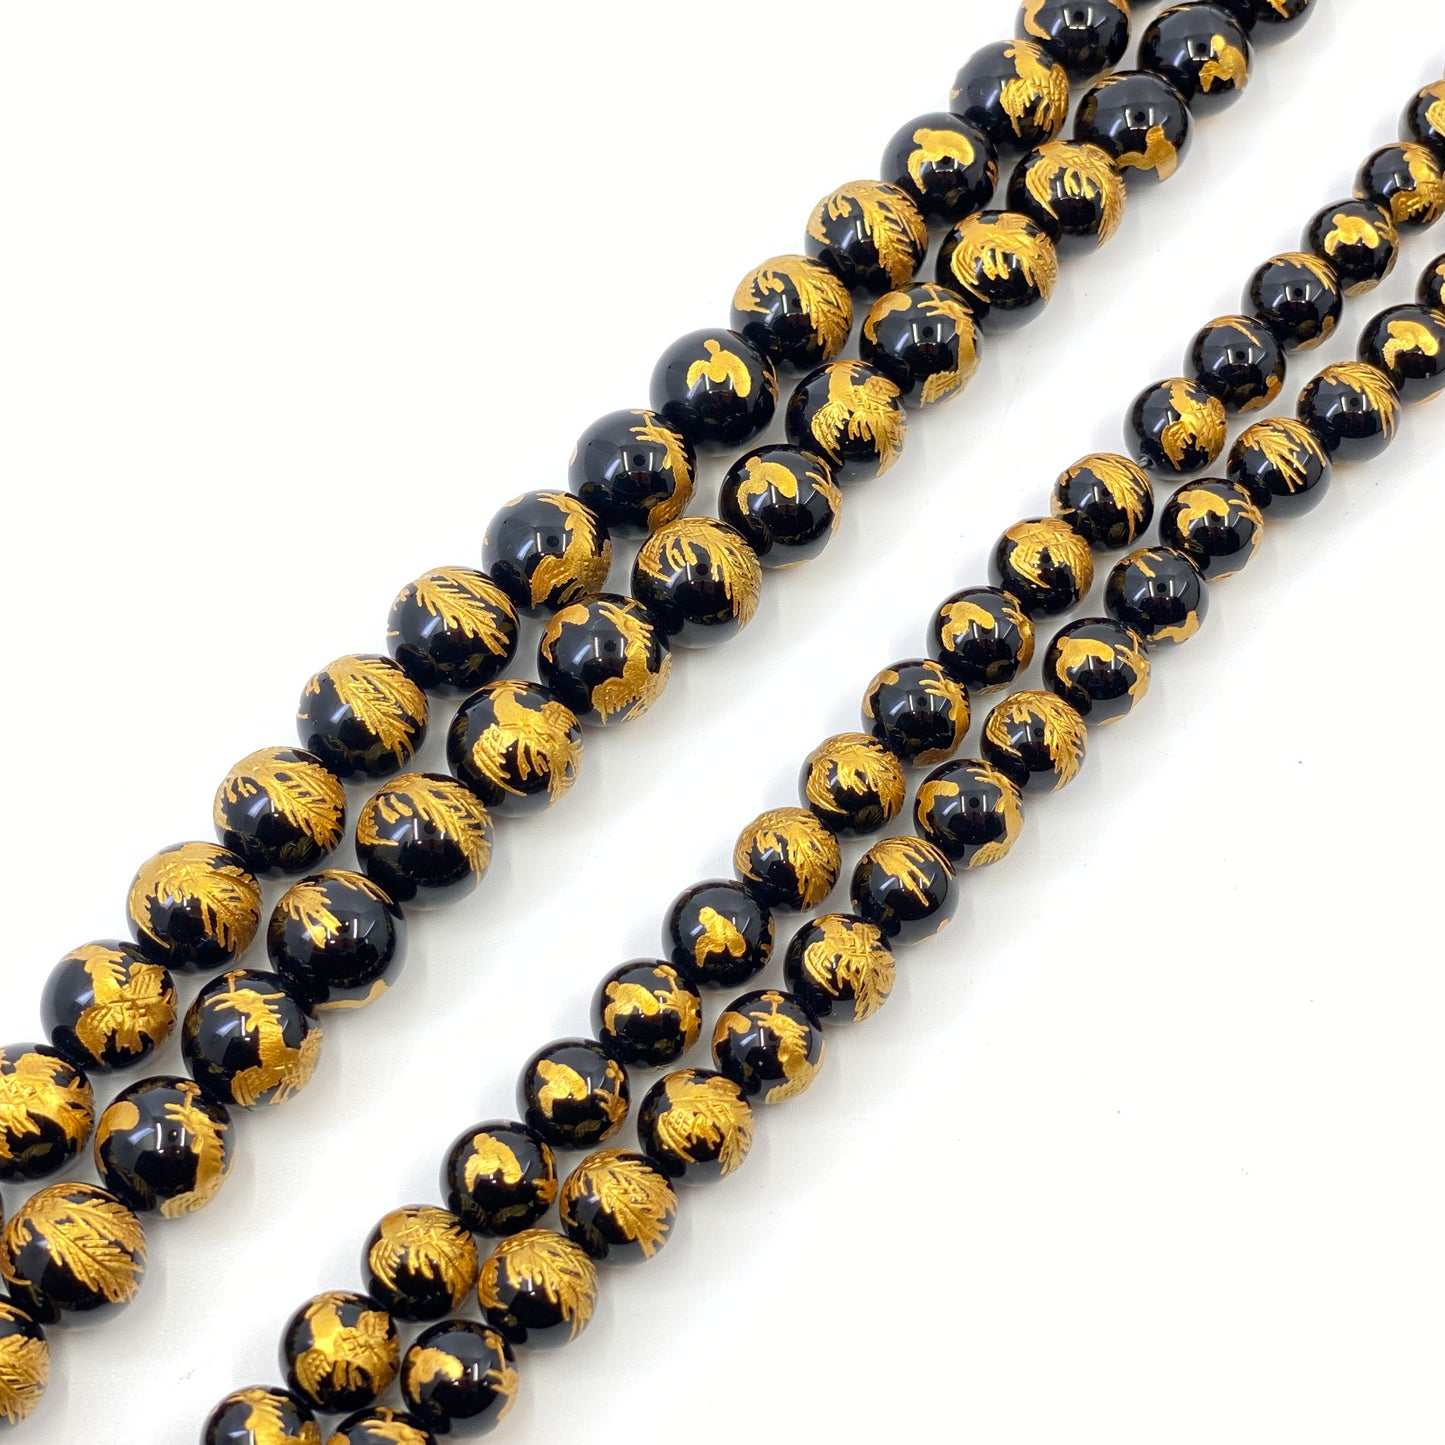 Gemstone with Etched Gold Phoenix 10mm Round Bead (7 Options Available) - 7.5" Strand